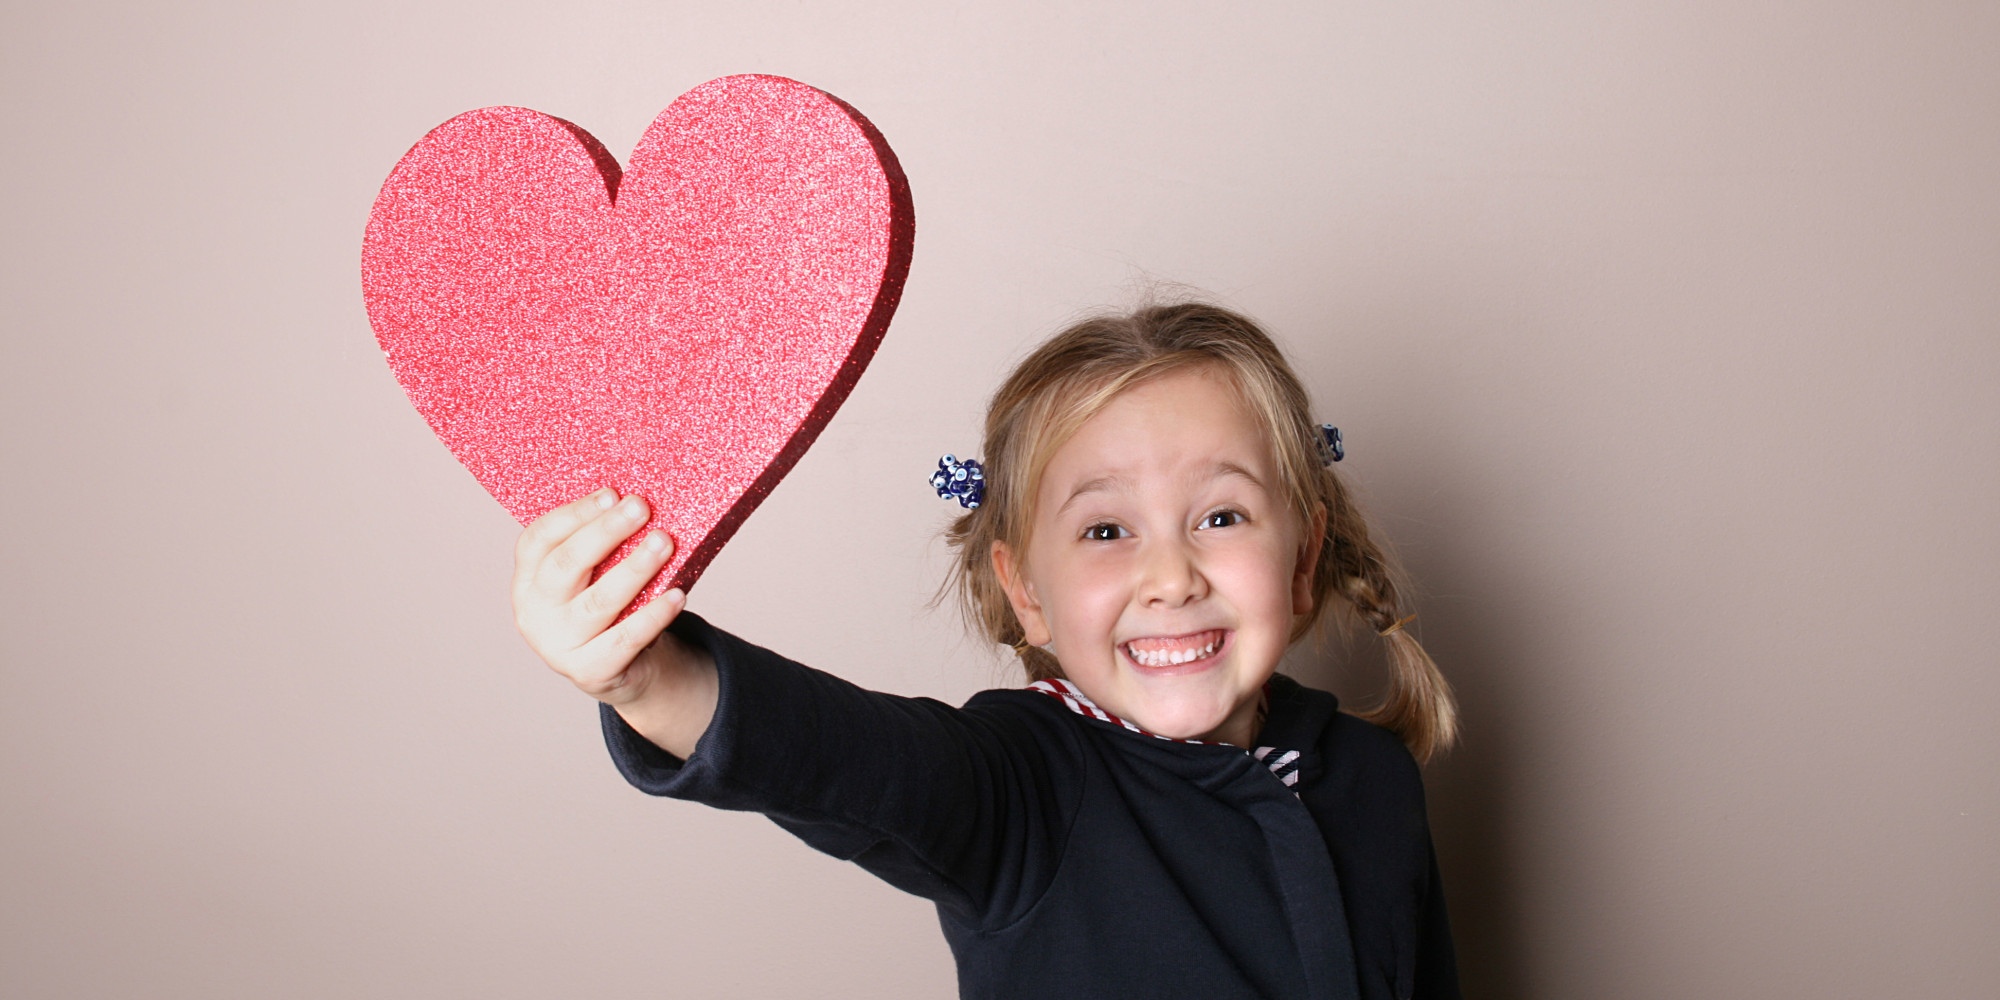 10 Anxieties All Kids Have On Valentine's Day